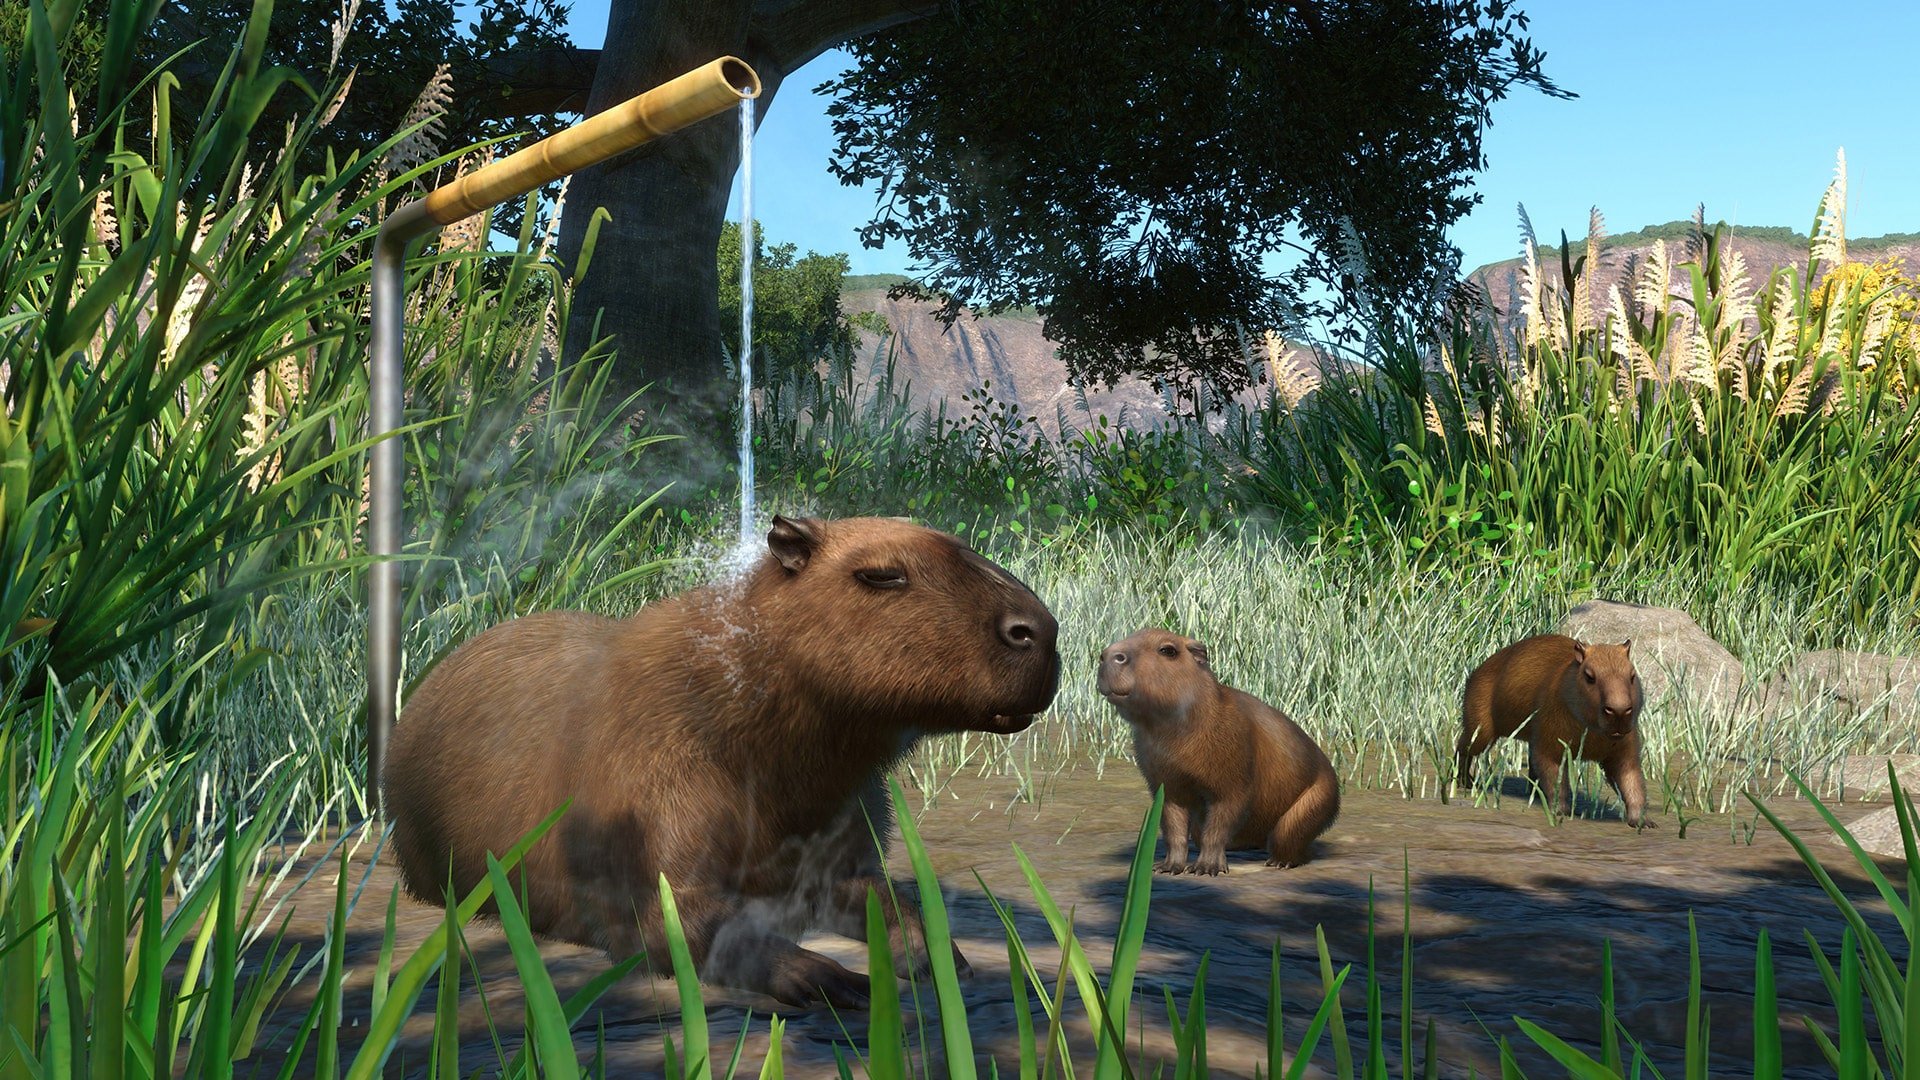 Planet Zoo Wetlands Animal Pack with capybaras